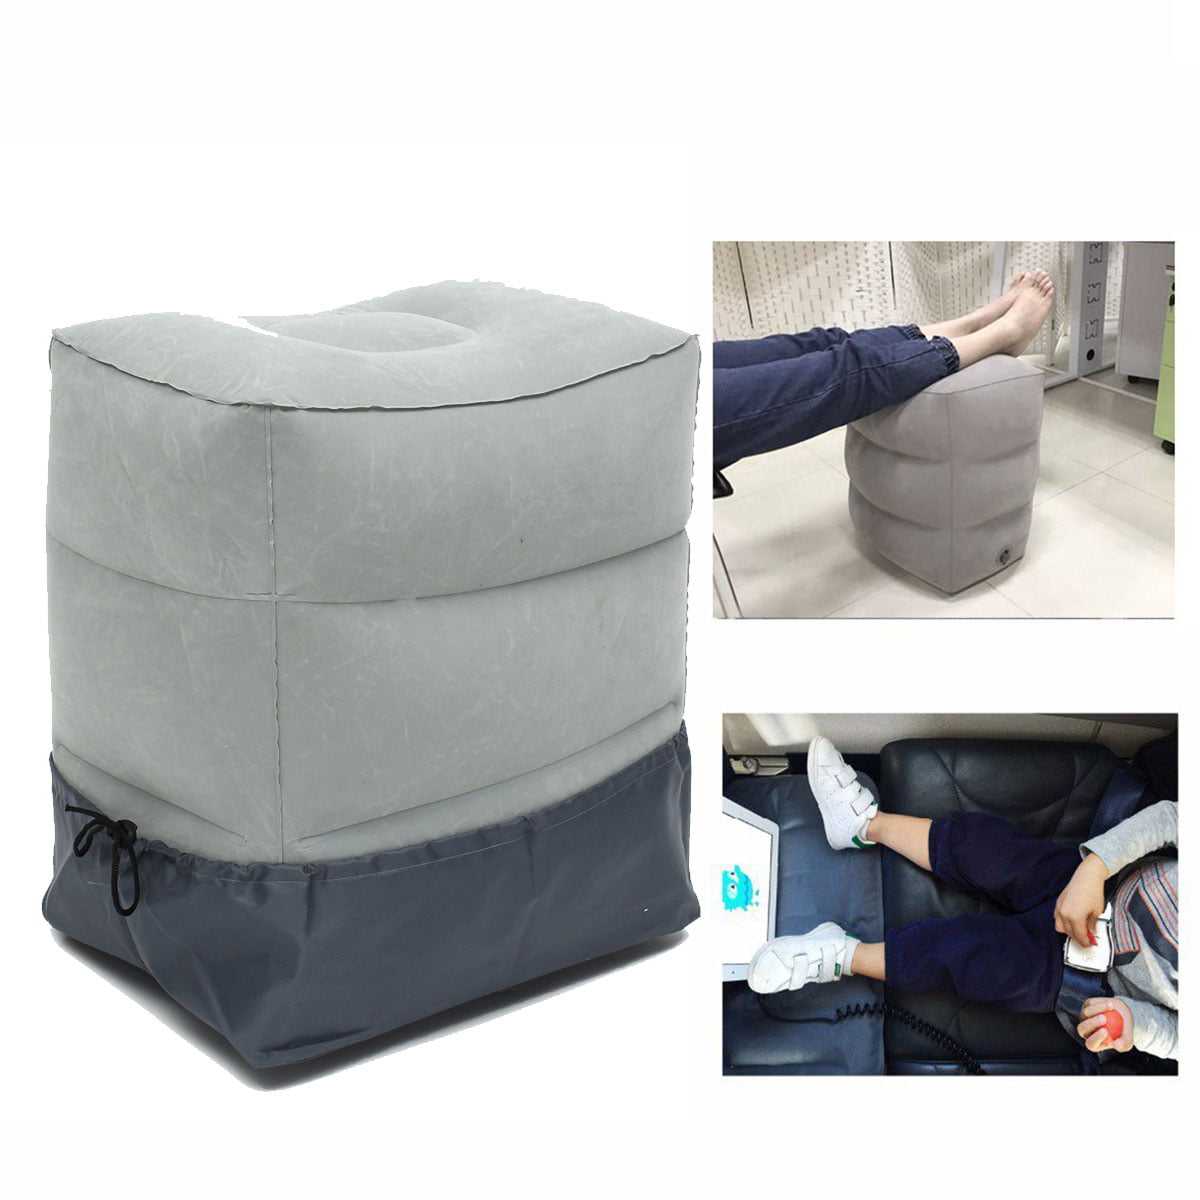 1-Pack,Gray Travel Foot Rest Pillow Portable Inflatable with Double Hand Pump Adjustable Three Layers Height Pillow for Foot Rest on Airplanes Cars Buses Trains Office Kids to Sleep 